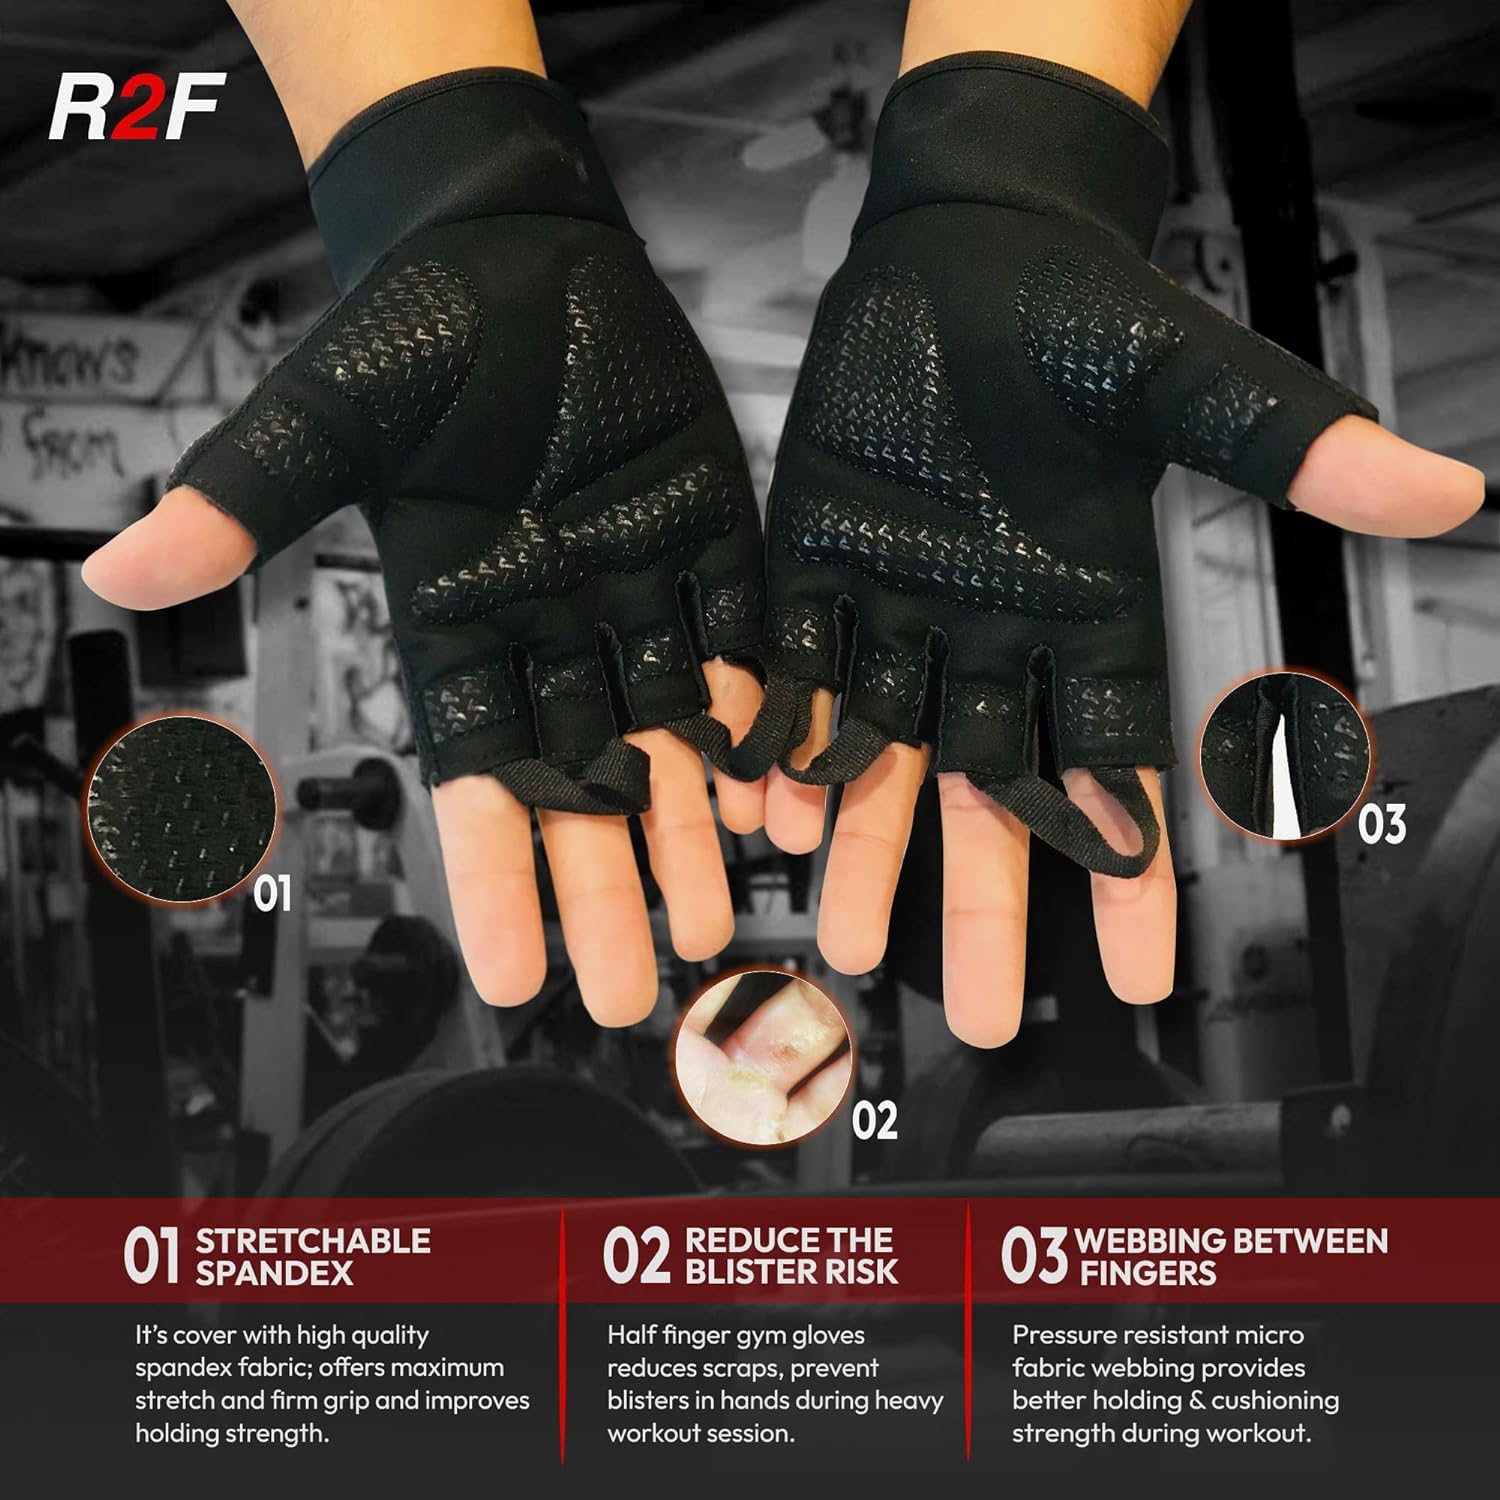 Shop high-quality weight lifting gloves and gym gloves for your workout at R2F Sports. Our gloves provide superior grip, wrist support, and comfort, allowing you to maximize your performance and protect your hands during intense training sessions. Experience the difference with R2F Sports today.